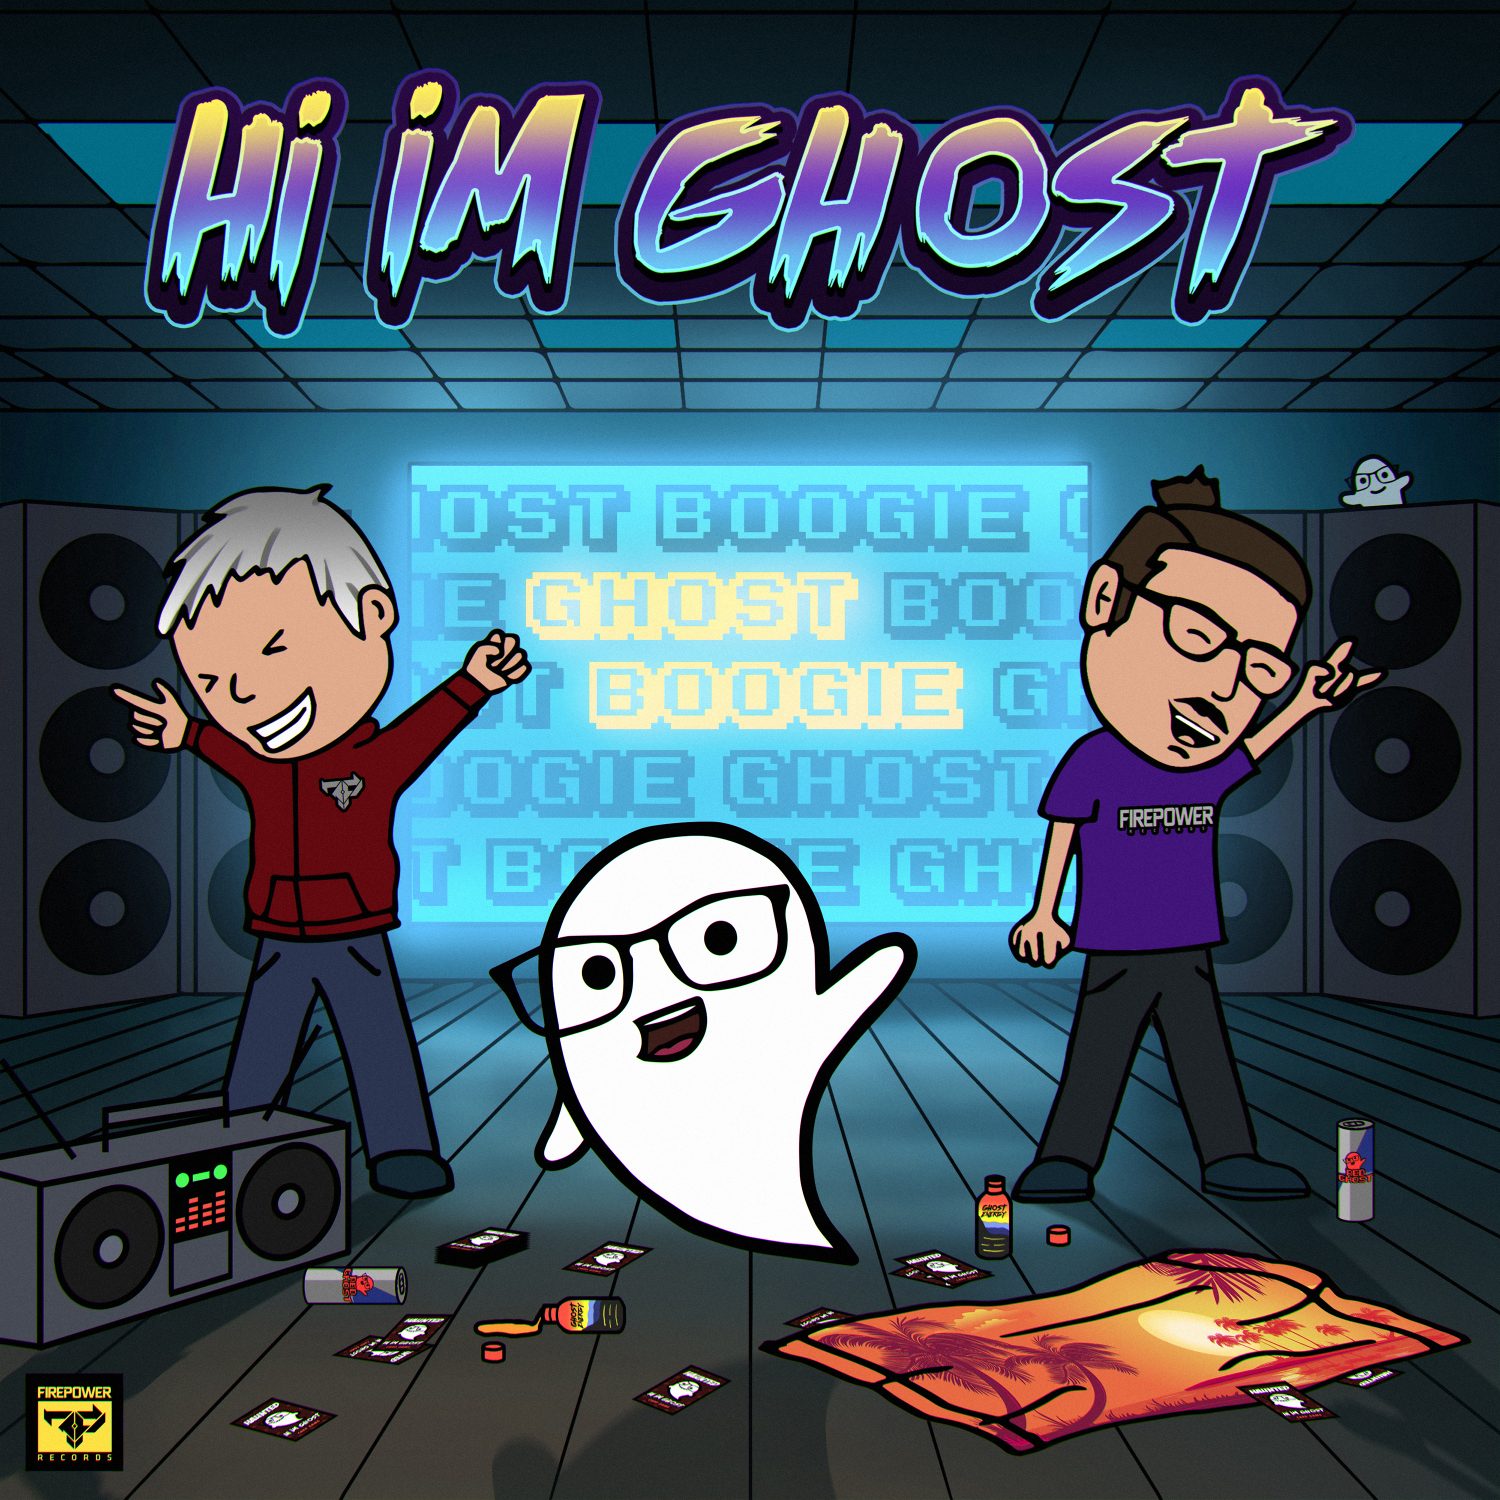 Hi I'm Ghost Ghost Boogie EP